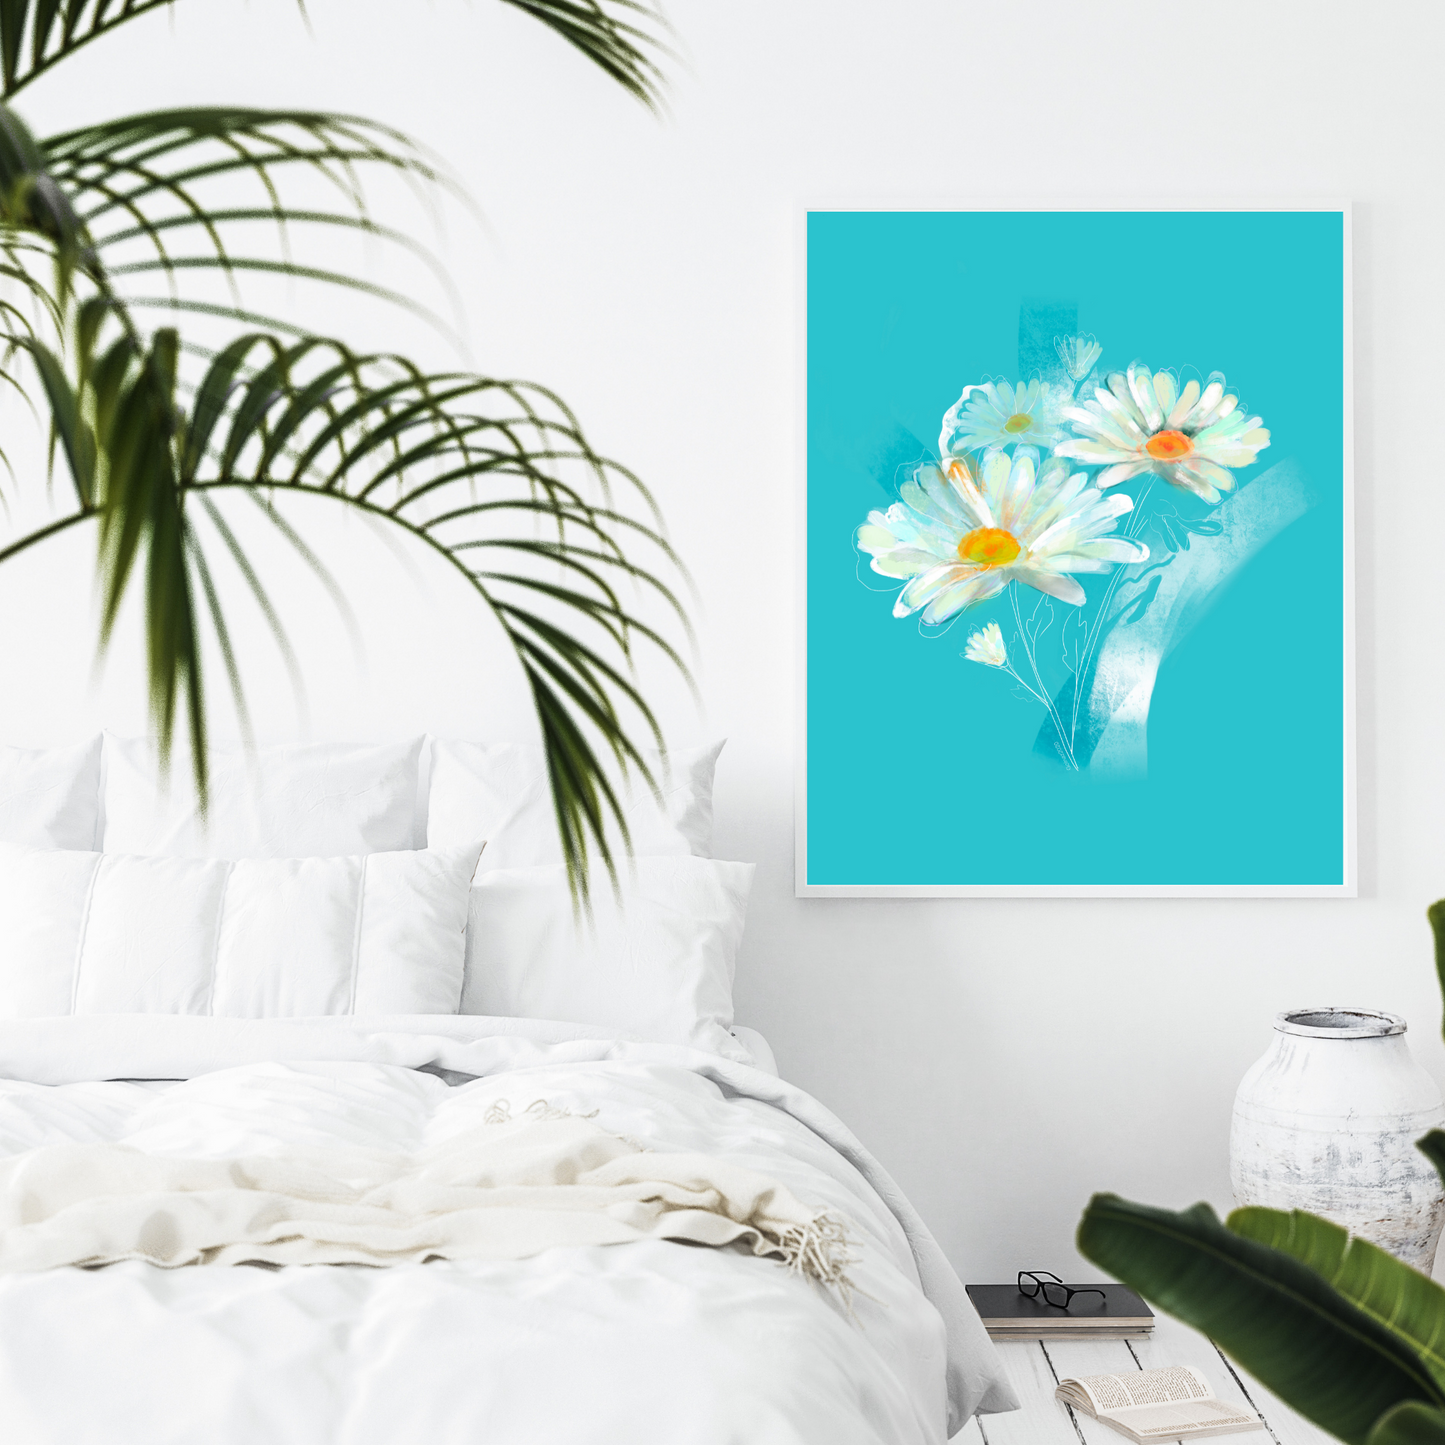 An example of the Daisy painting by ArisaTeam in a bedroom